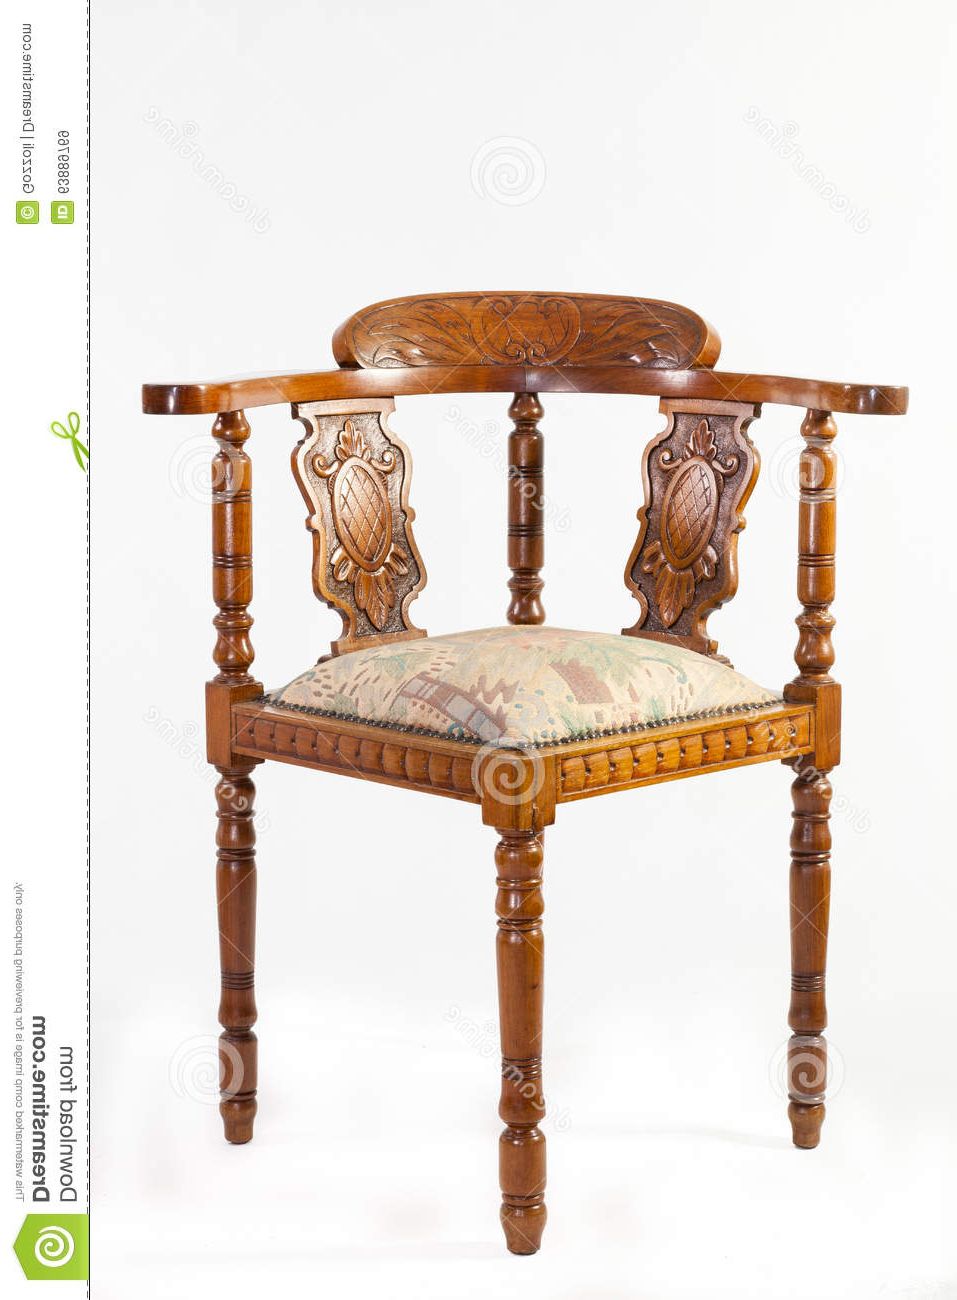 Latest Gozzoli Slipper Chairs Inside 2,000 Century Chair Photos – Free & Royalty Free Stock (View 20 of 20)